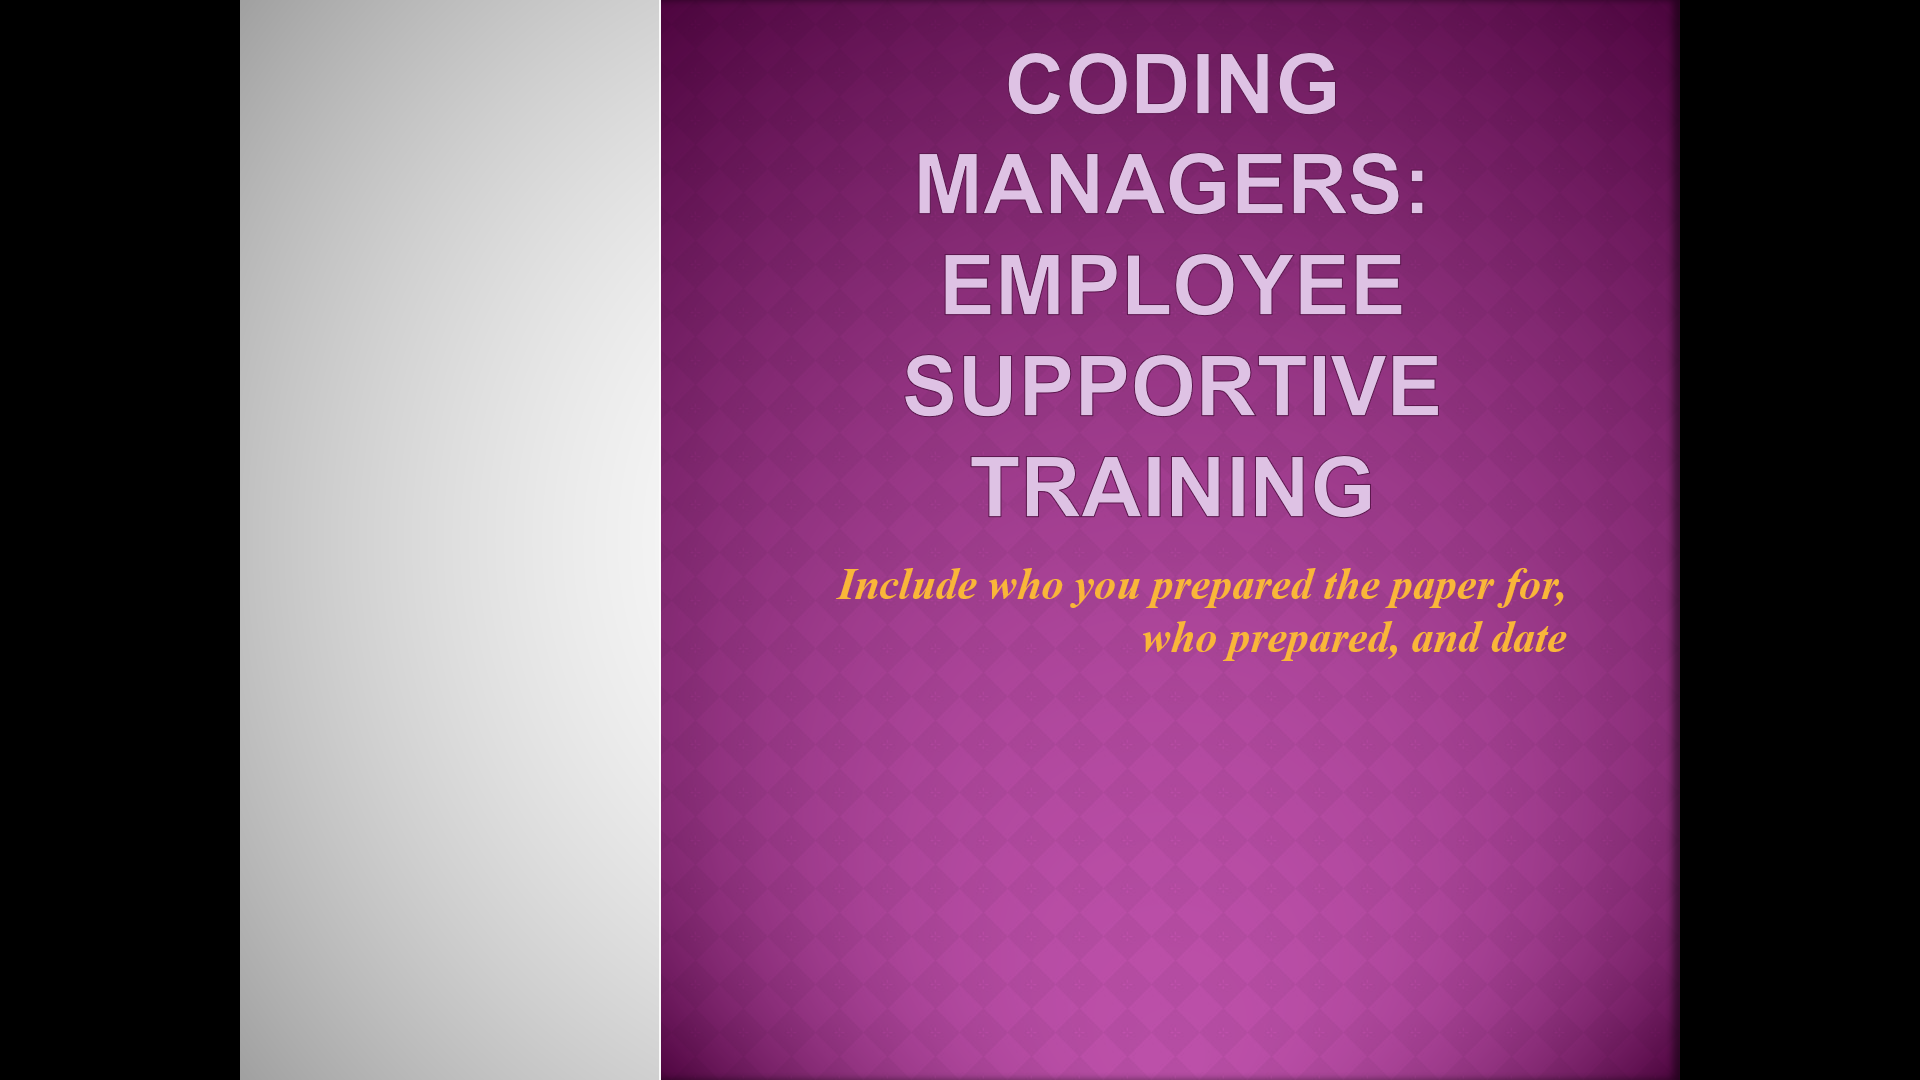 Coding Managers Employee Supportive Training, Power Point Presentation Example